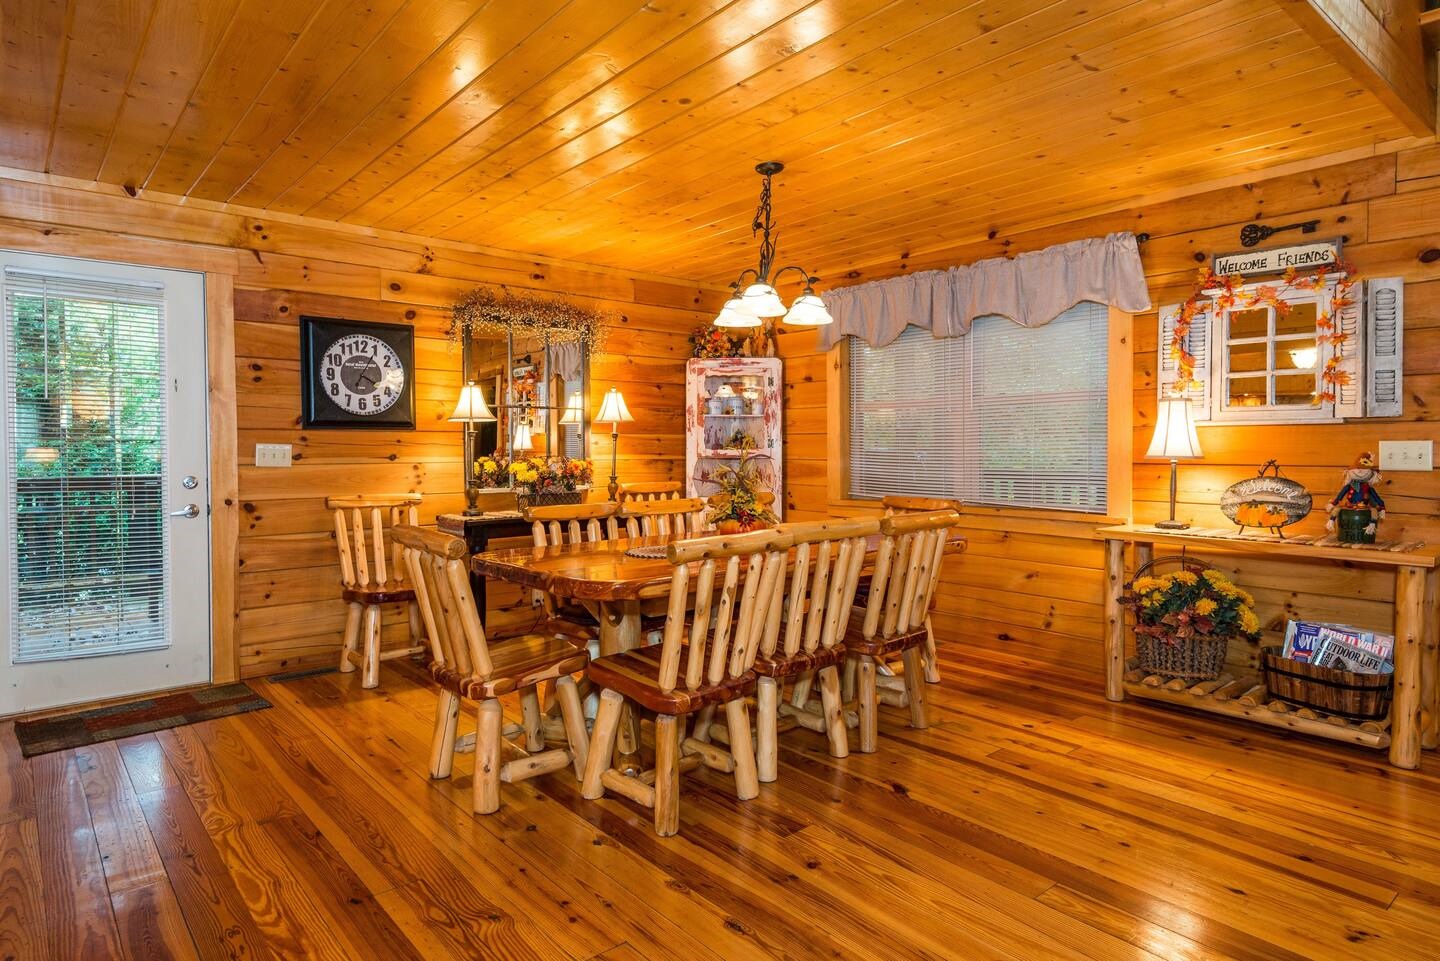 Fairytale Log Cabin dining area with huge massive wooden table